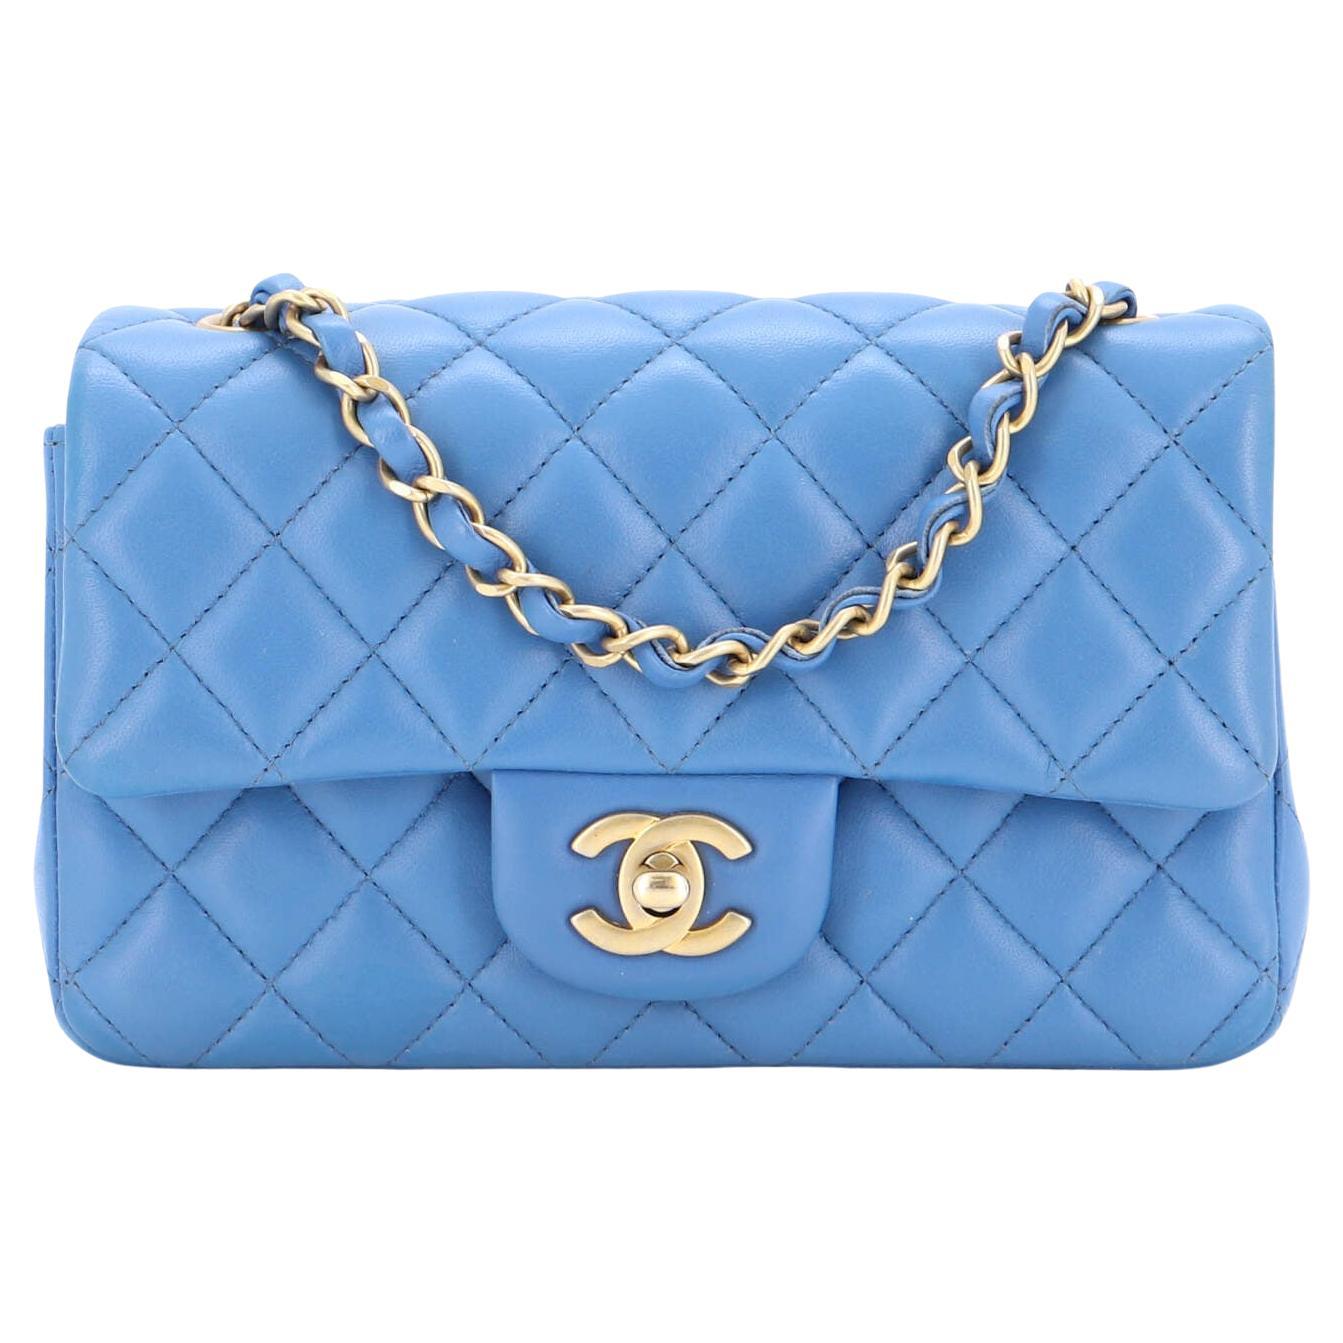 Chanel Limited Edition Distressed Calfskin Classic Double Flap Bag